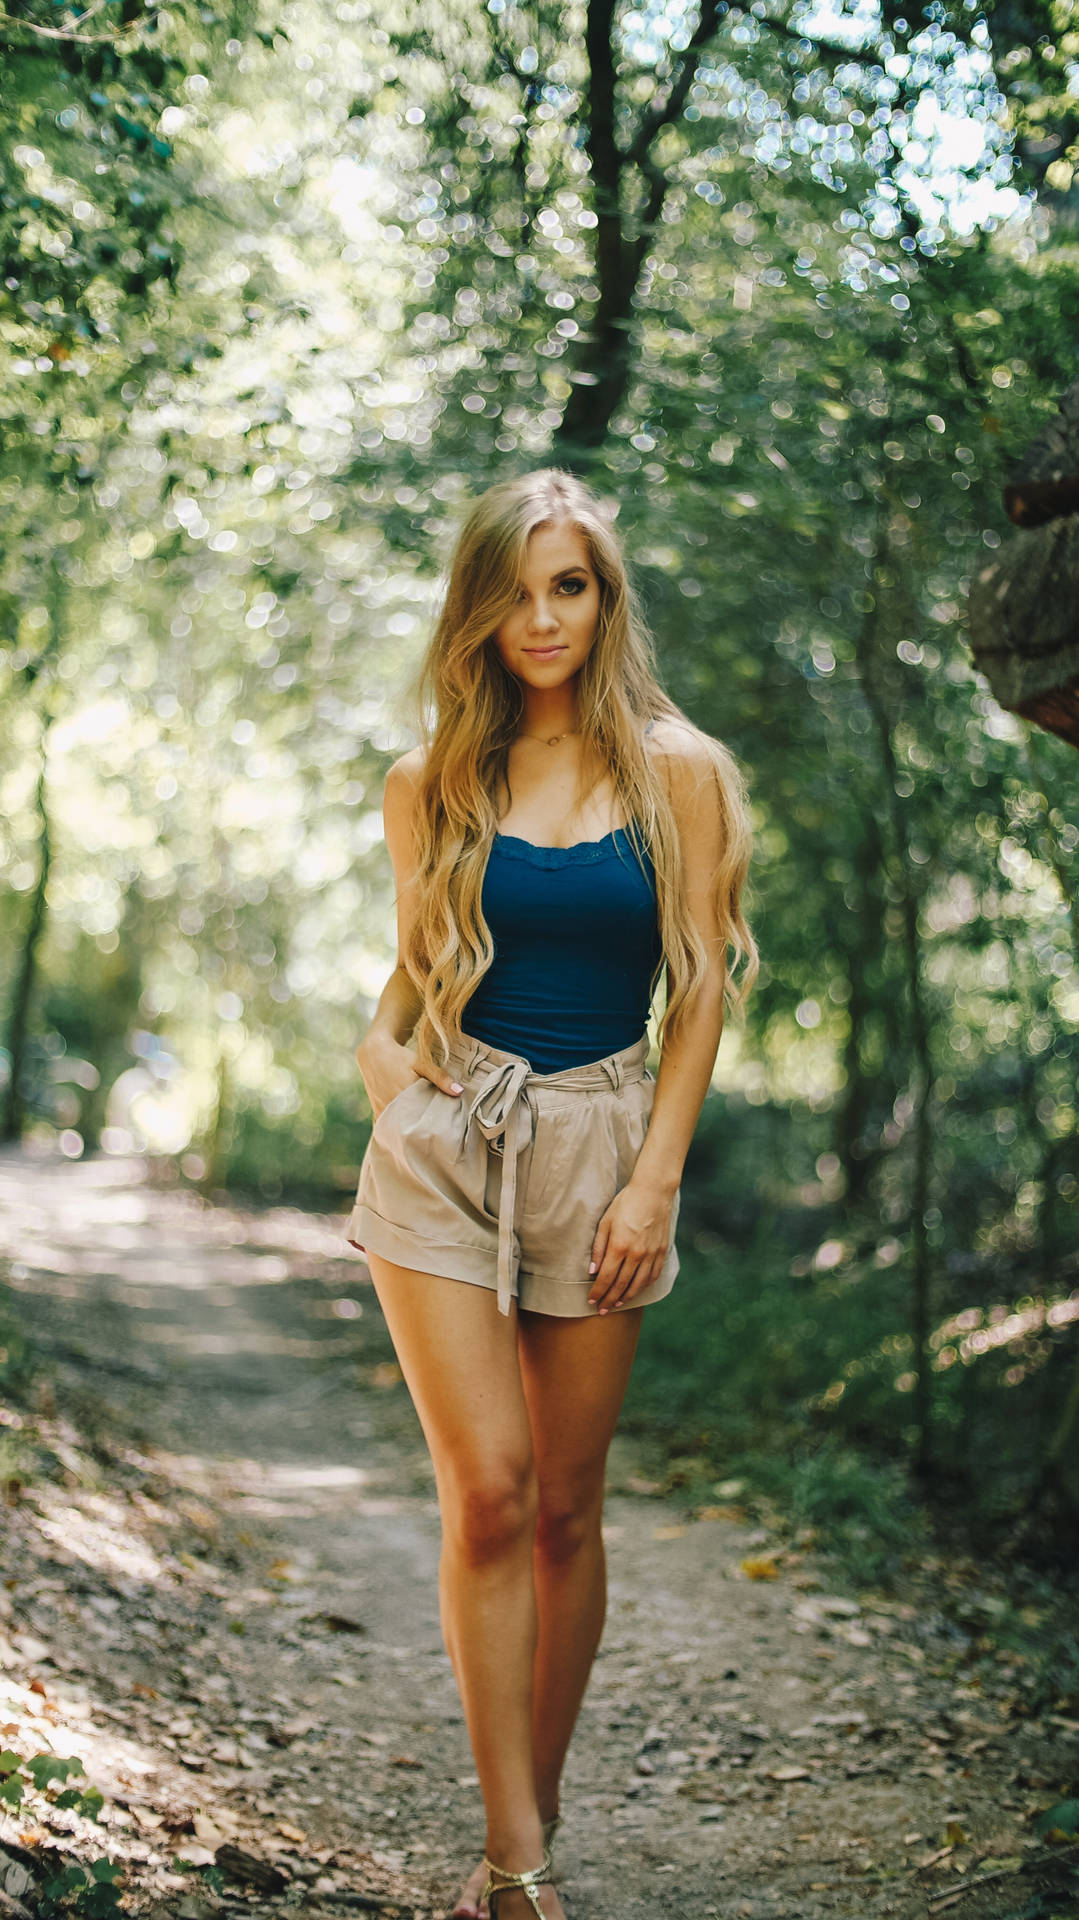 Very Pretty Girl And A Forest Trail Background